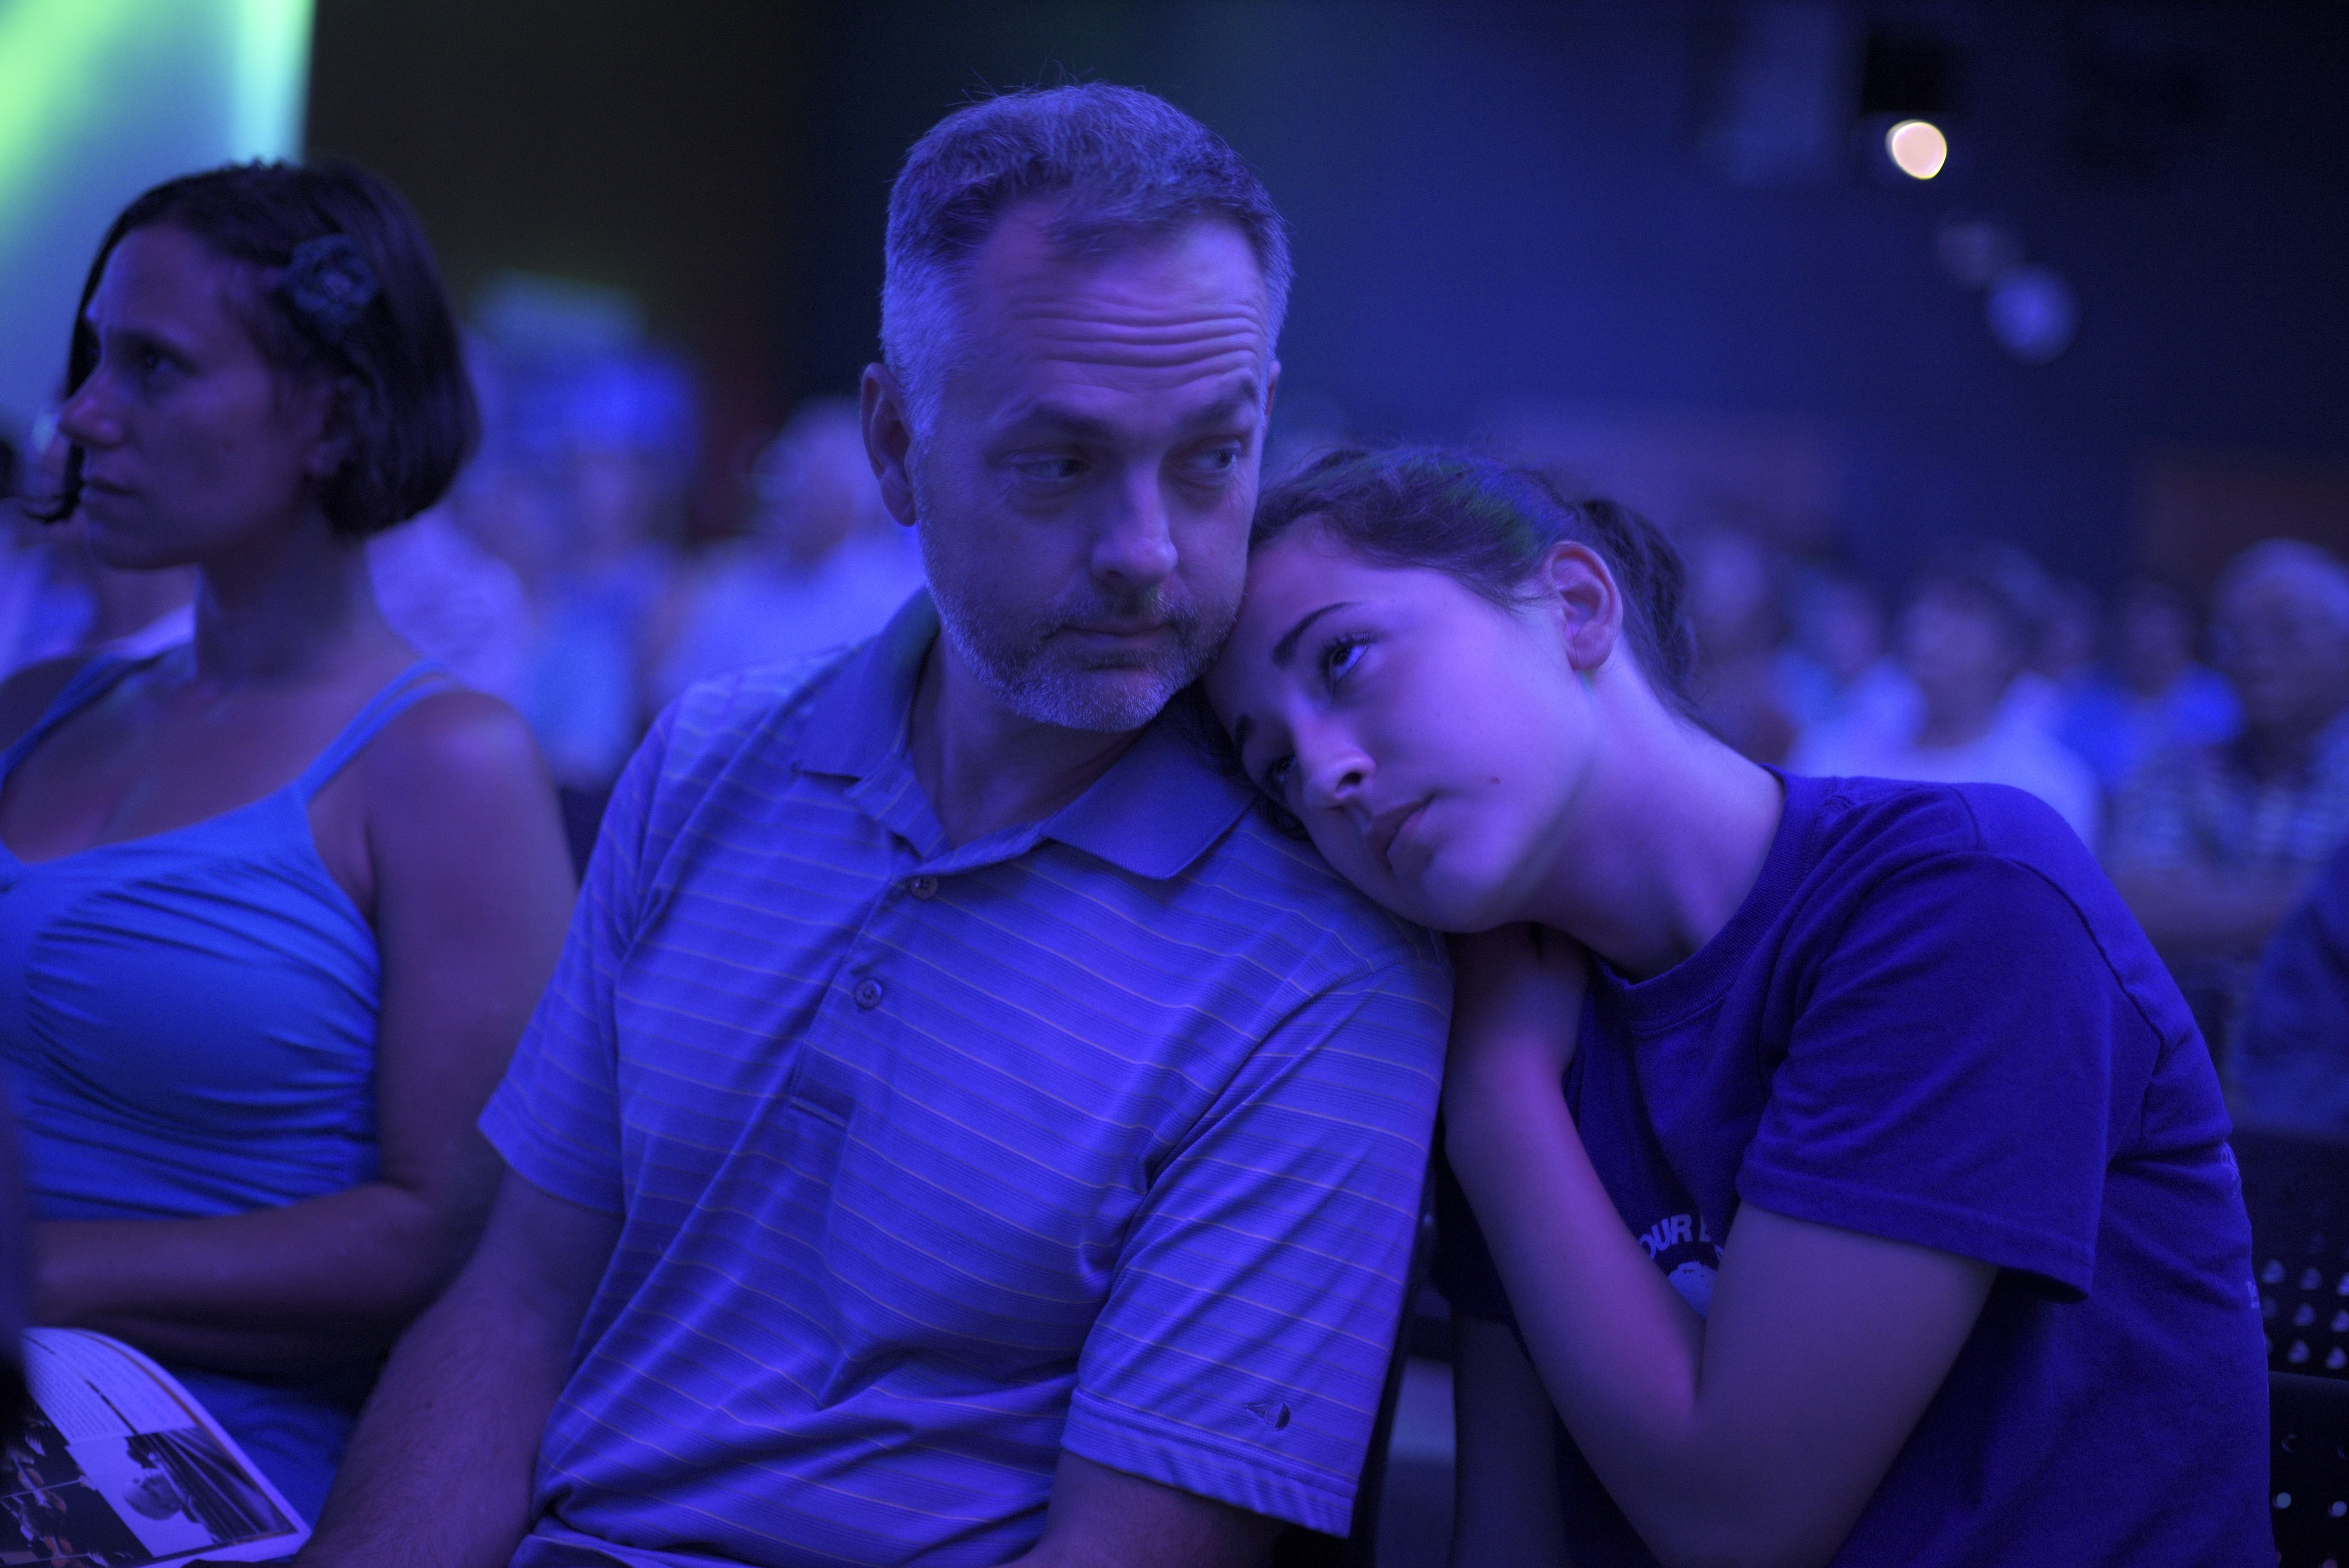 Molly Schutzius, of Lebanon, rests on her father, Tom Schutzius, during the Hopkins Center season launch party in Alumni Hall in Hanover, N.H. Thursday, July 14, 2016. (Valley News - James M. Patterson) Copyright Valley News. May not be reprinted or used online without permission. Send requests to permission@vnews.com.